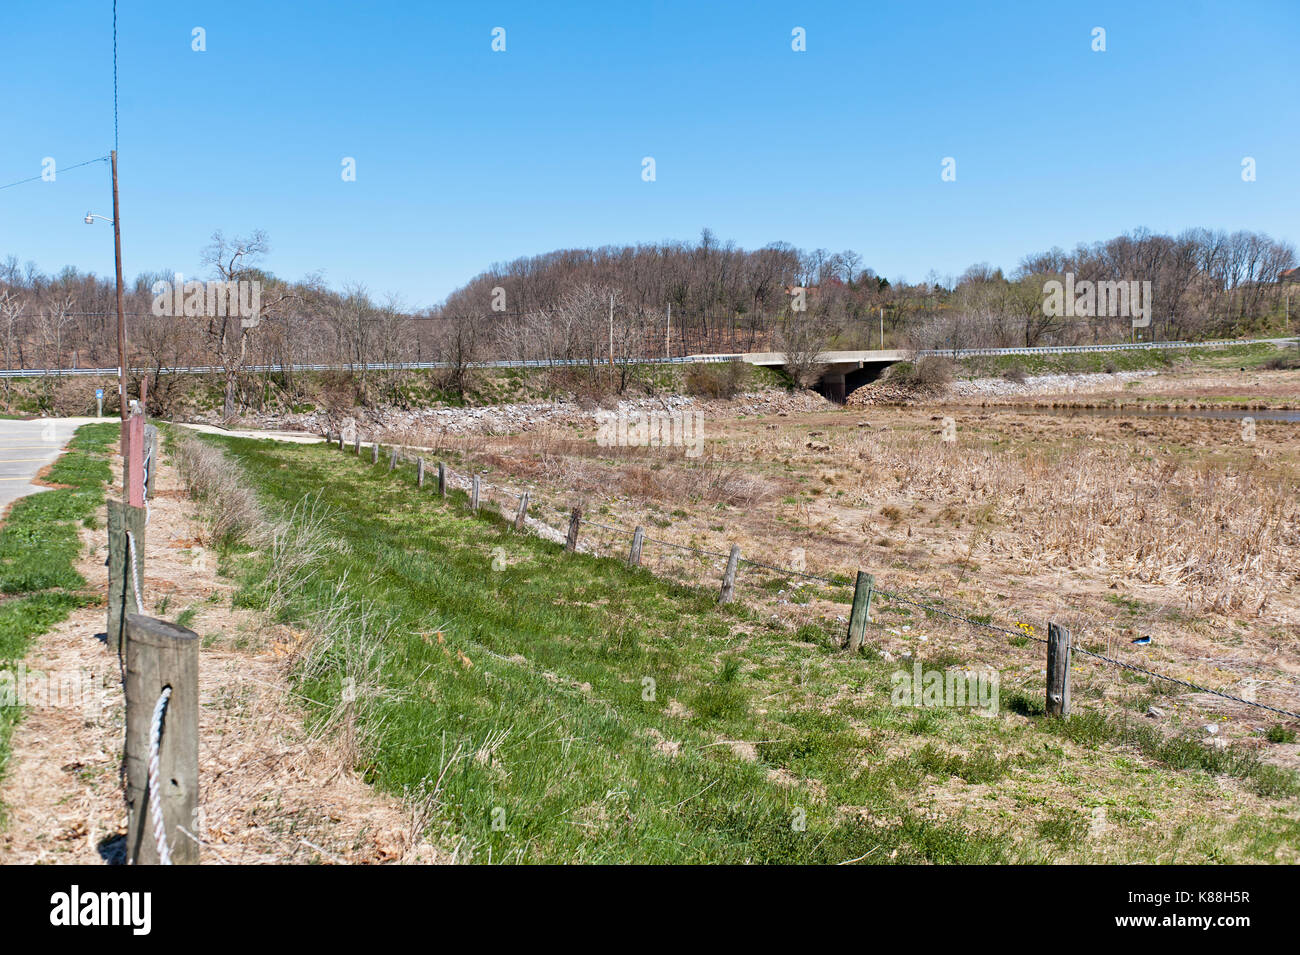 VIEW OF DRY LAKE BED AND BRIDGE AT THE LOWER END OF SPEEDWELL FORGE LAKE AFTER DRAINING DUE TO DAM DAMAGE, LITITZ PENNSYLVANIA Stock Photo